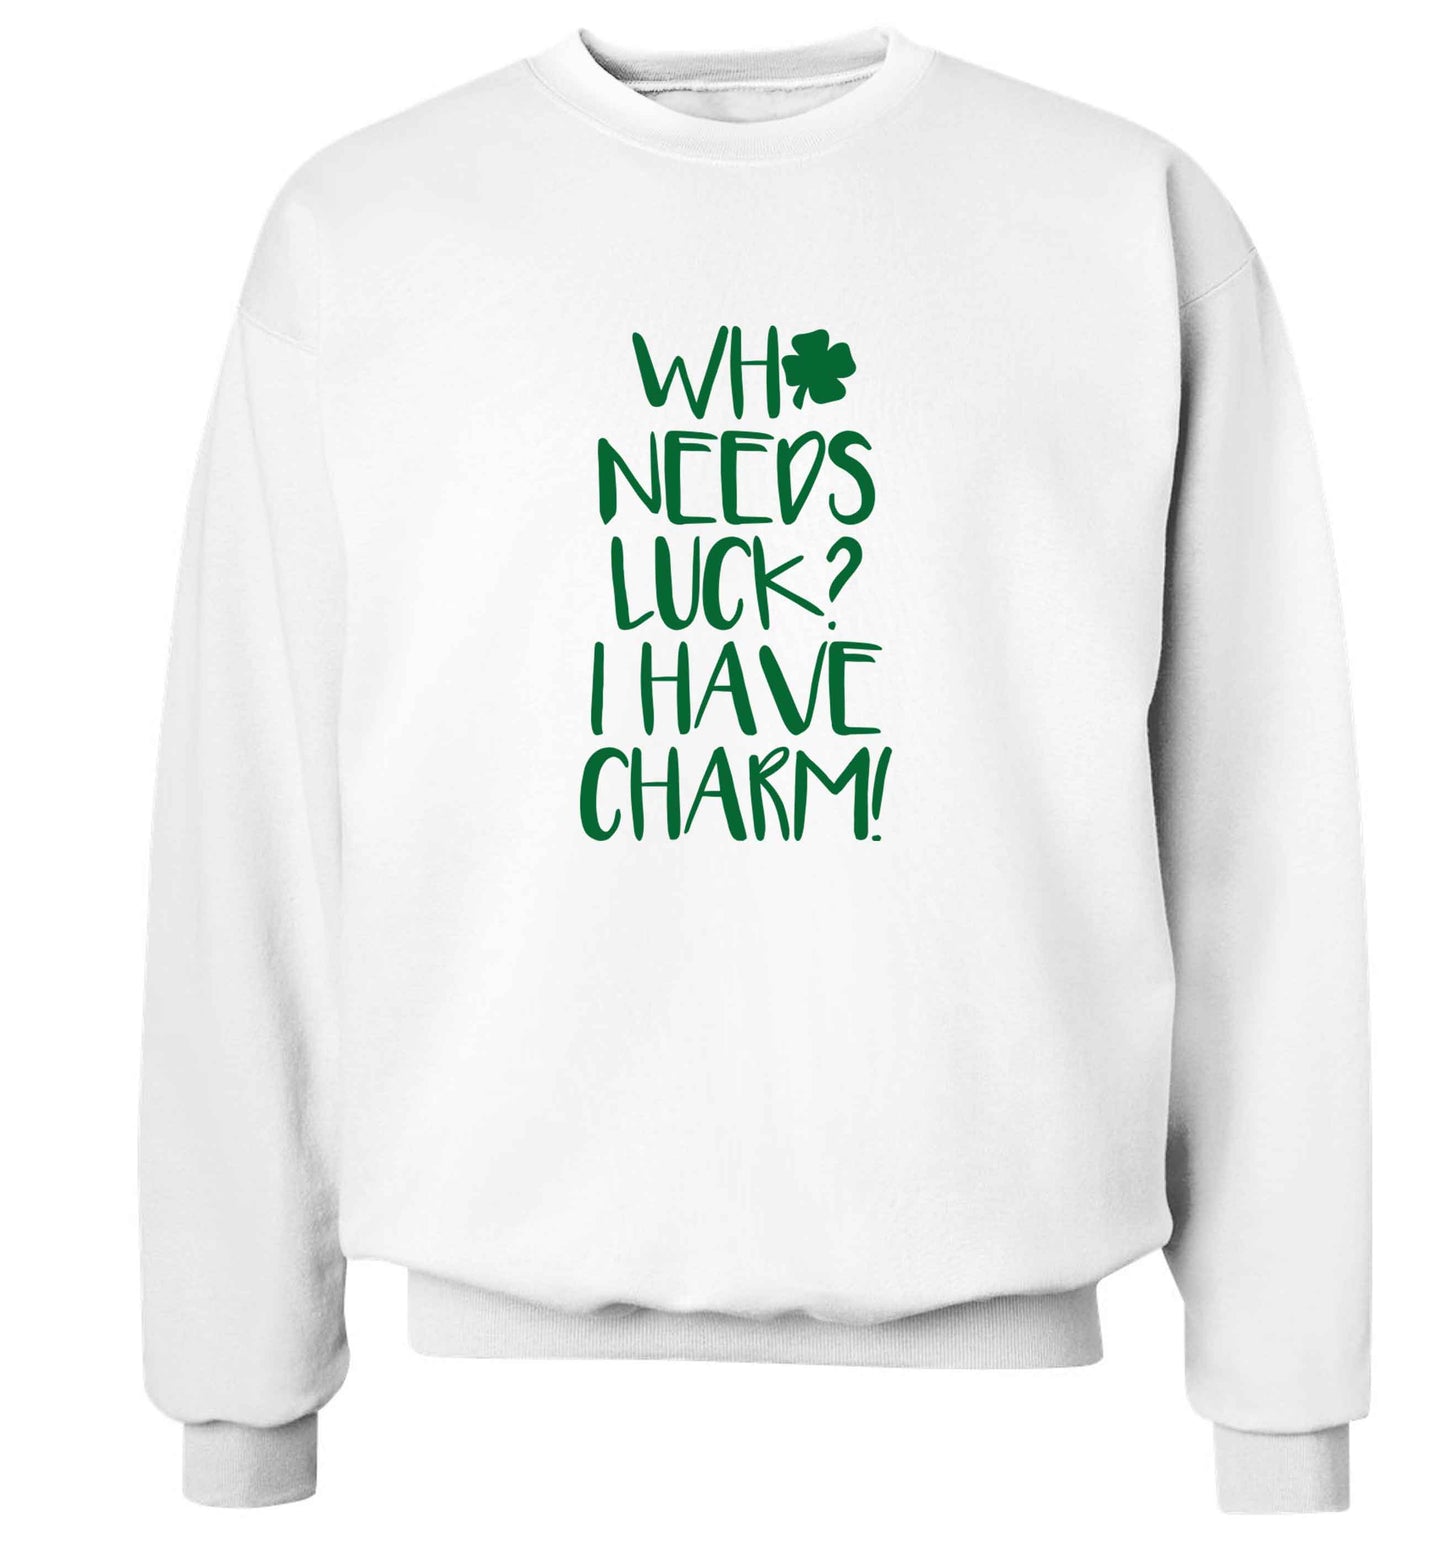 Who needs luck? I have charm! adult's unisex white sweater 2XL